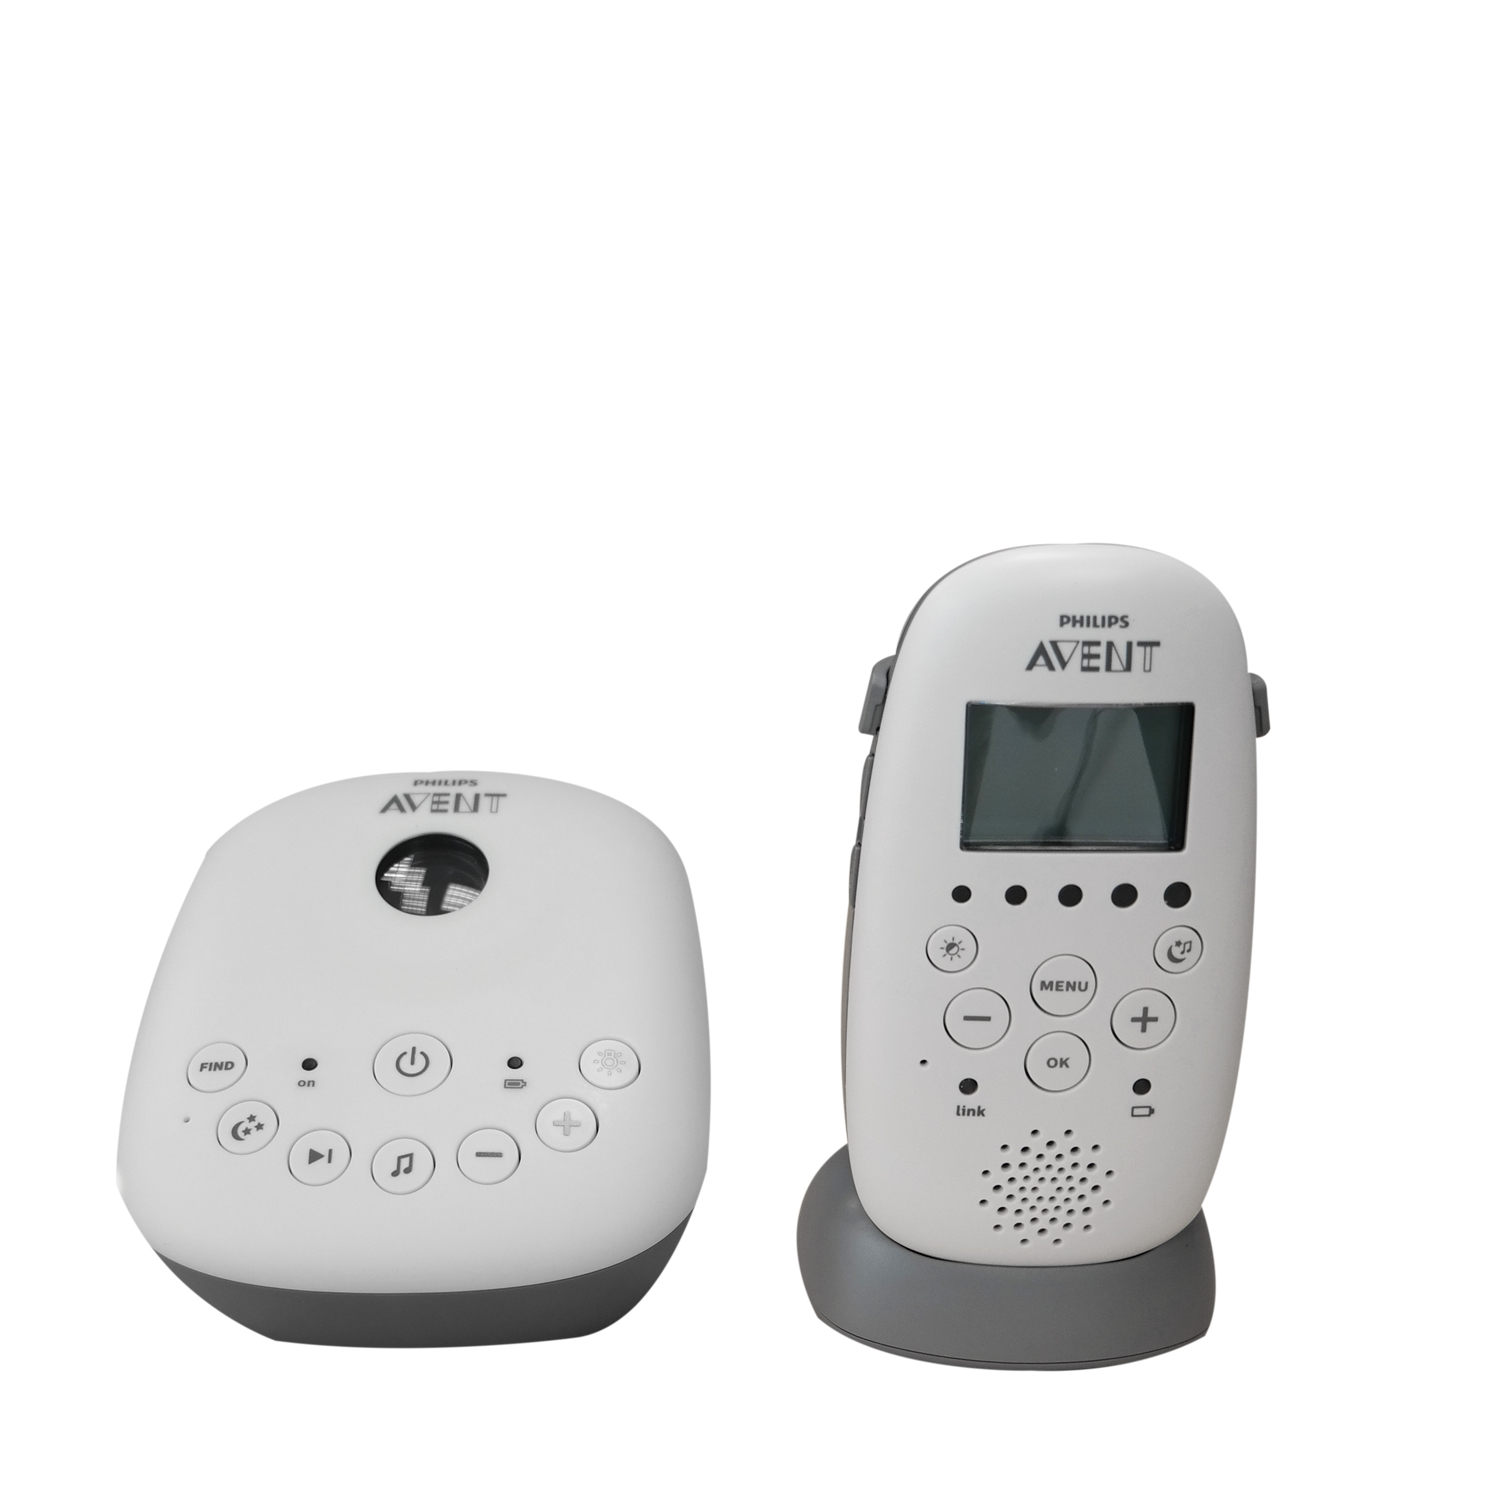 Philips Avent SCD733/26 Avent DECT, Babyphone, Weiß